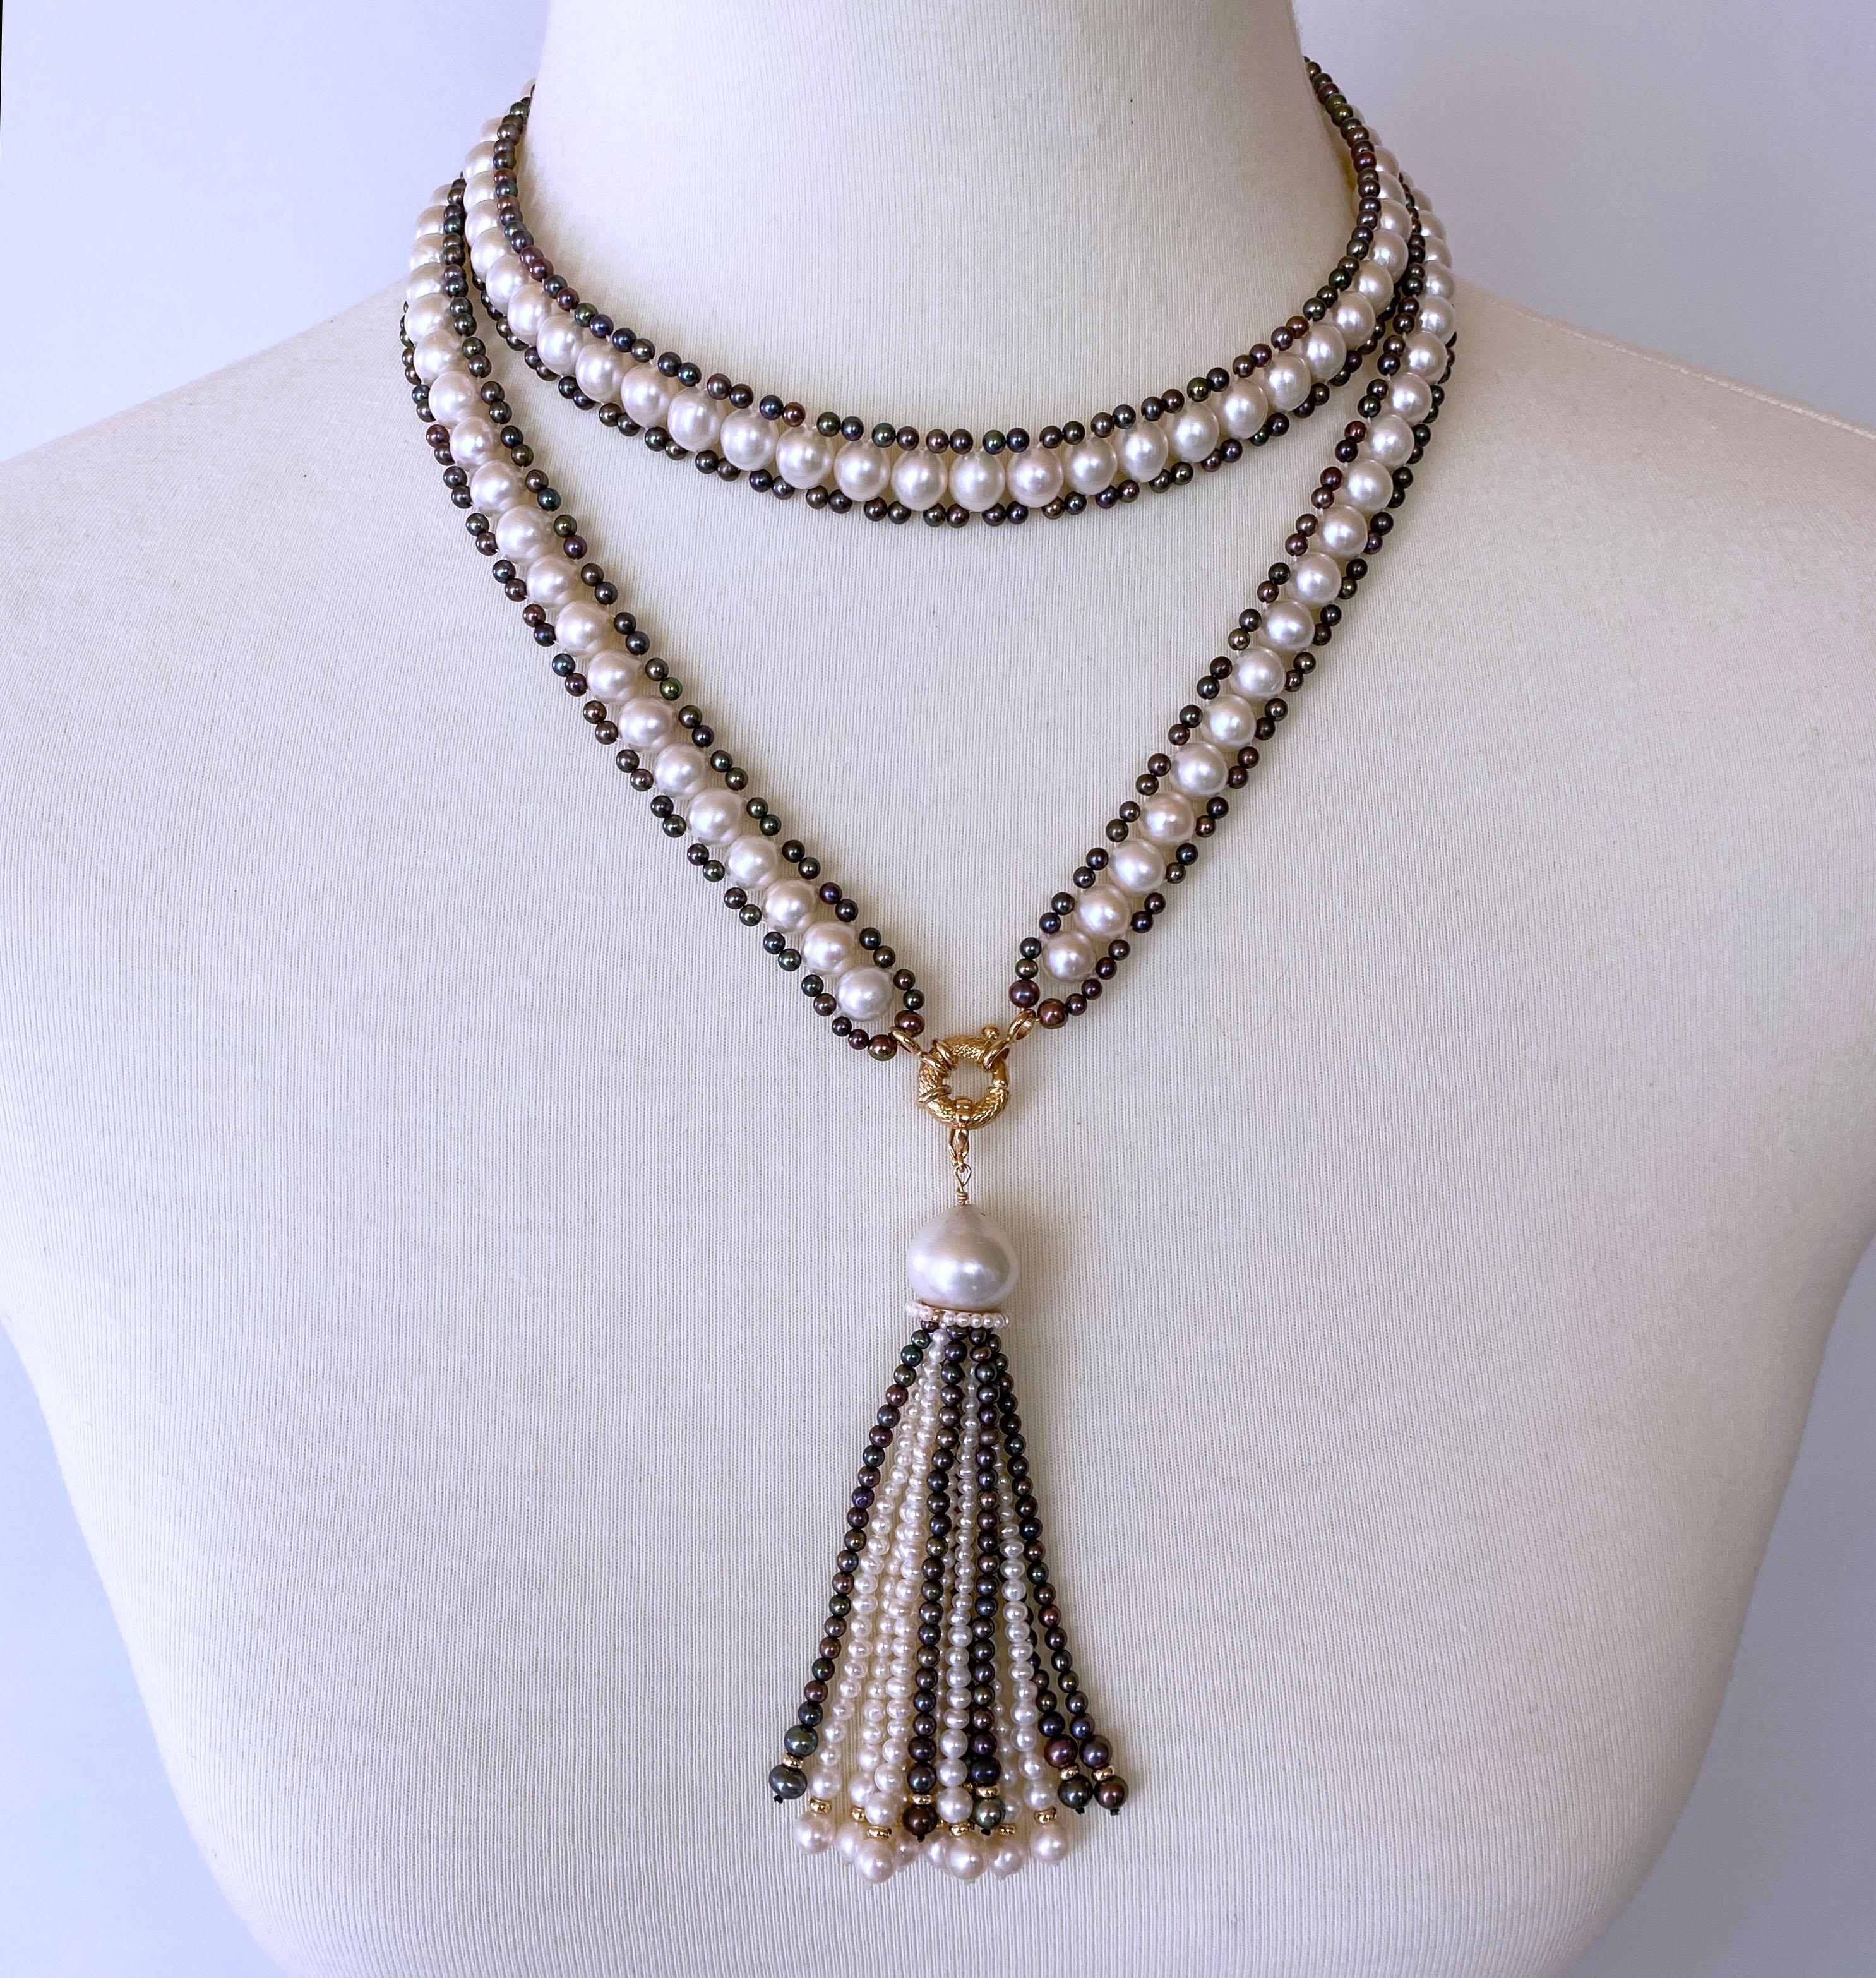 Classic piece by Marina J. This Sautoir is hand woven with all cultured Pearls displaying a beautiful luster and sheen. The small Black Pearls lining this Sautoir all have an 